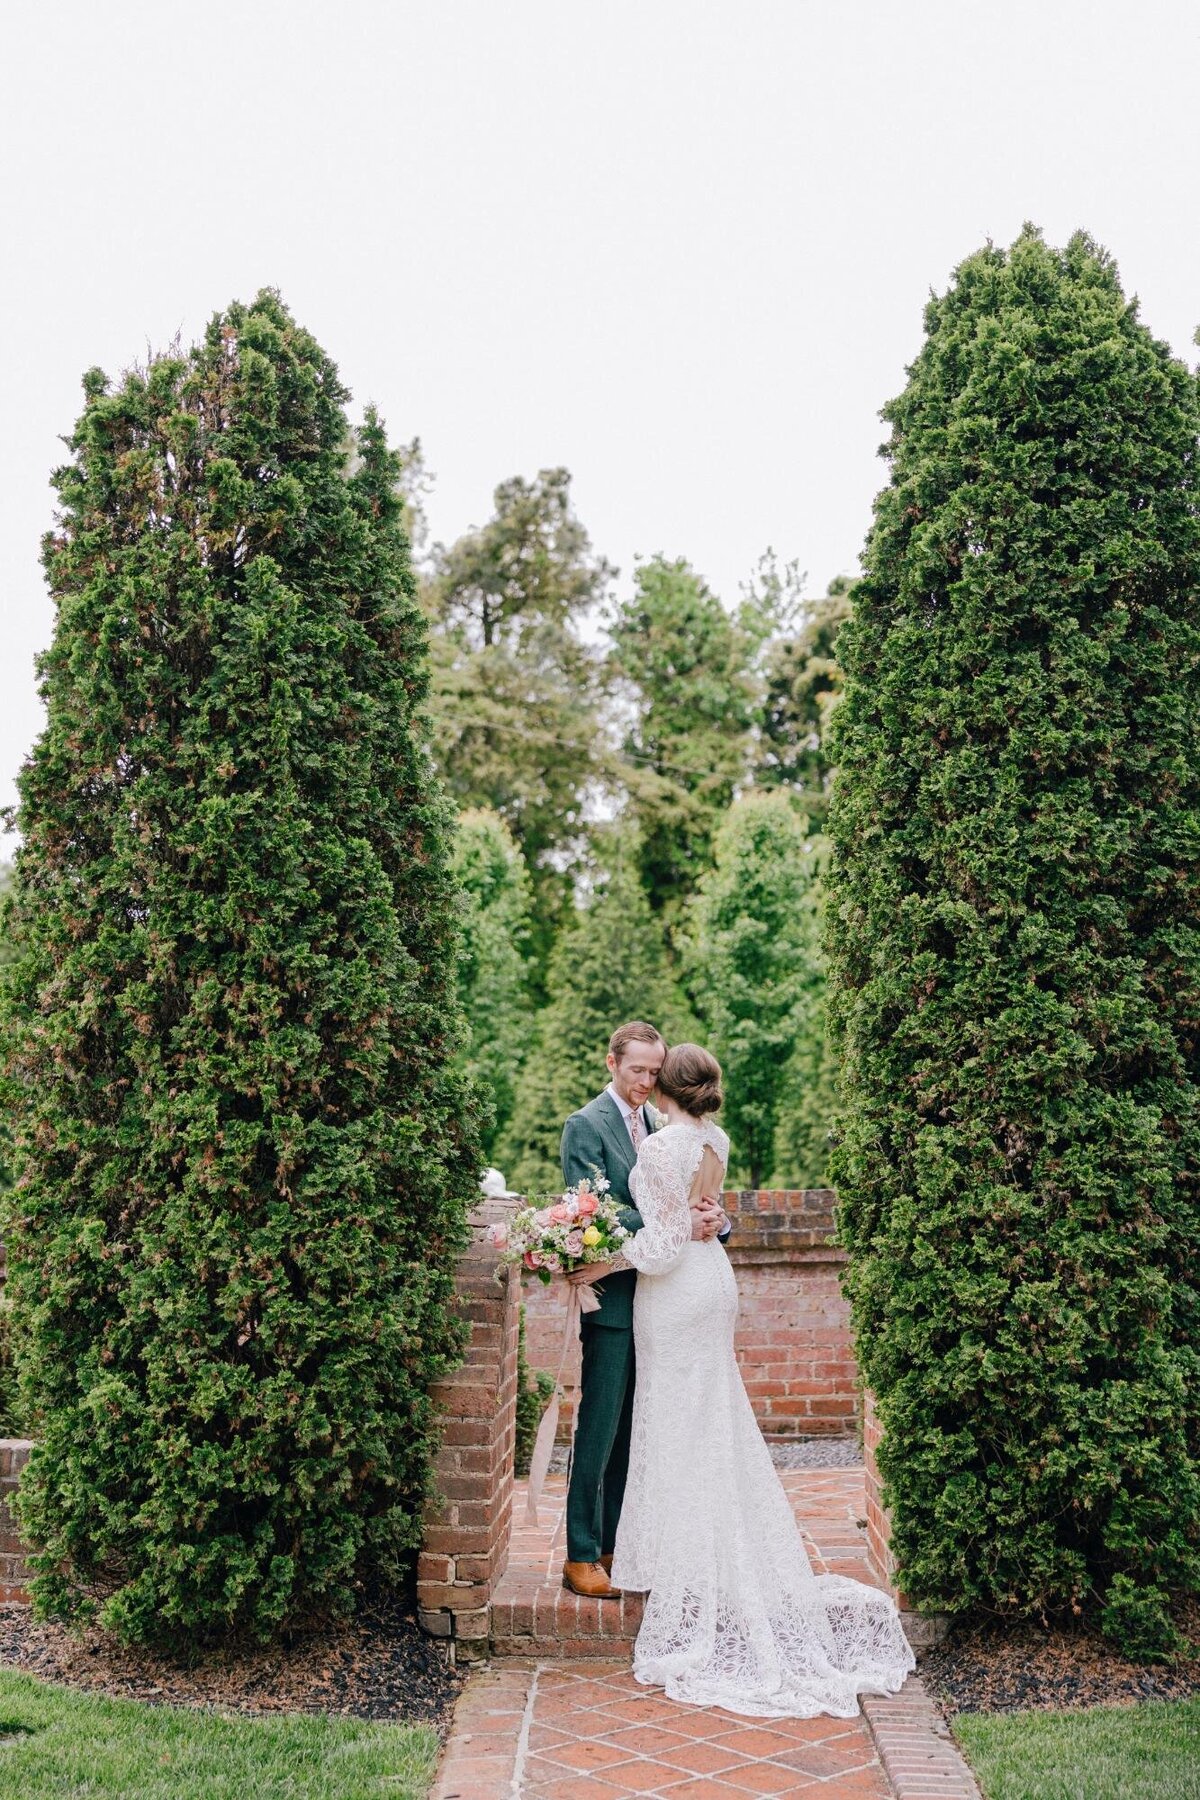 A couple embraces surrounded by lush greenery and tall hedges.